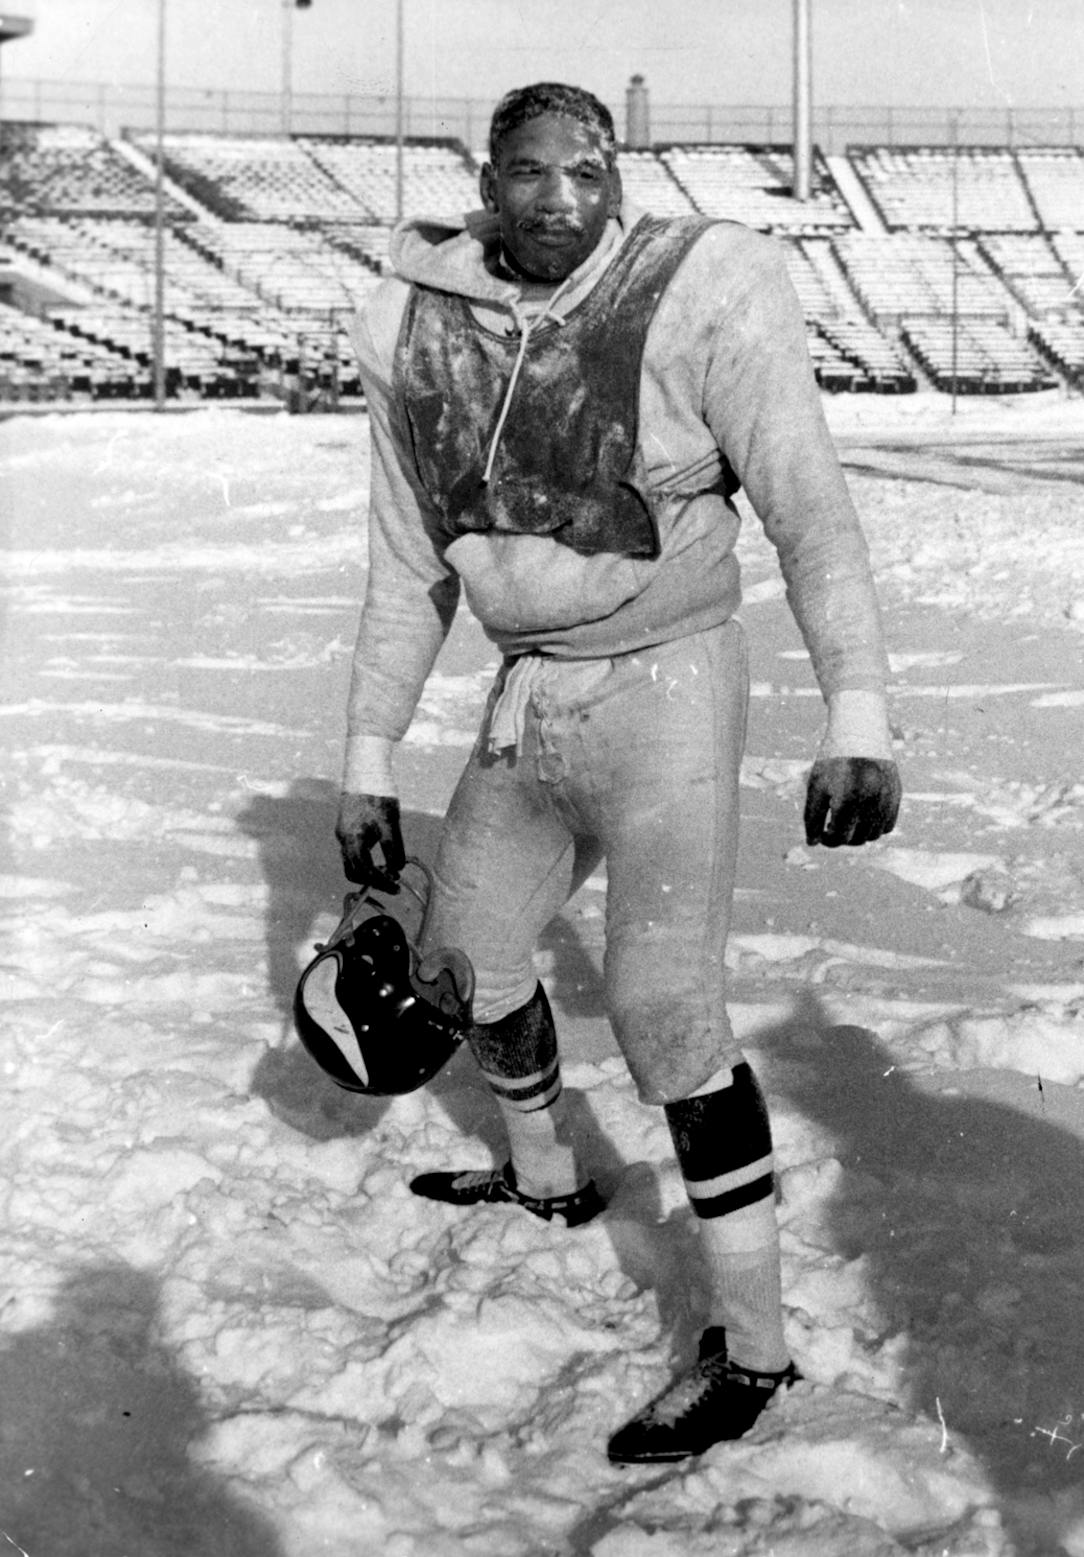 Gallery: Remember those old, cold Vikings games?